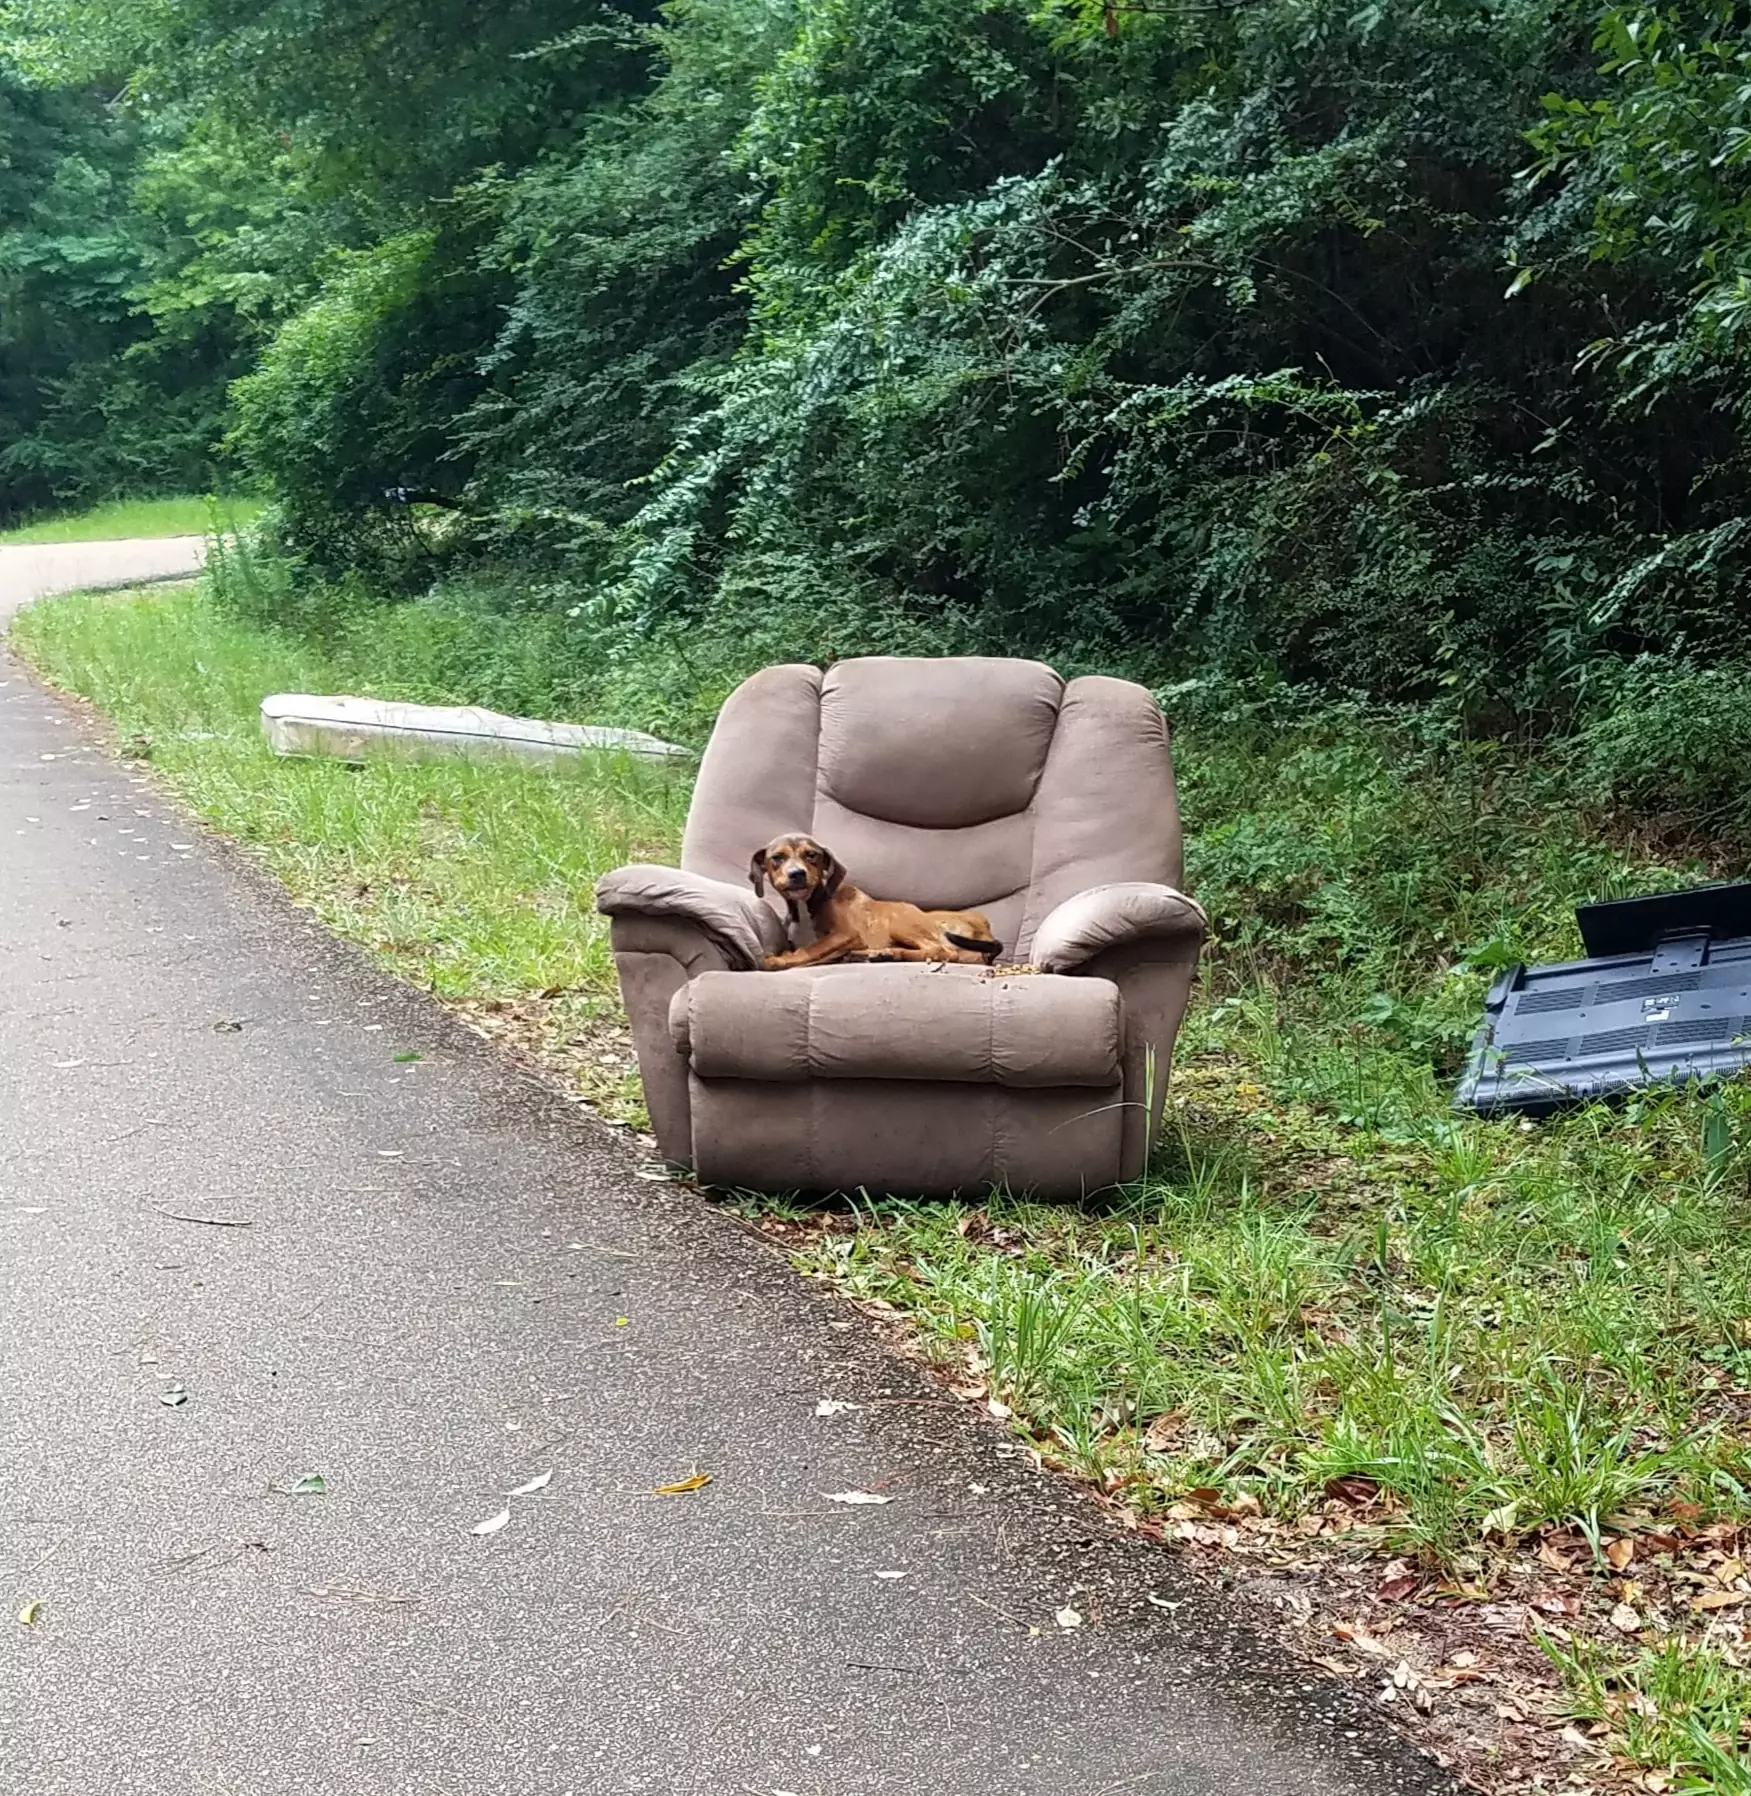 The 'dumped' dog was spotted on the side of the road in Mississippi.